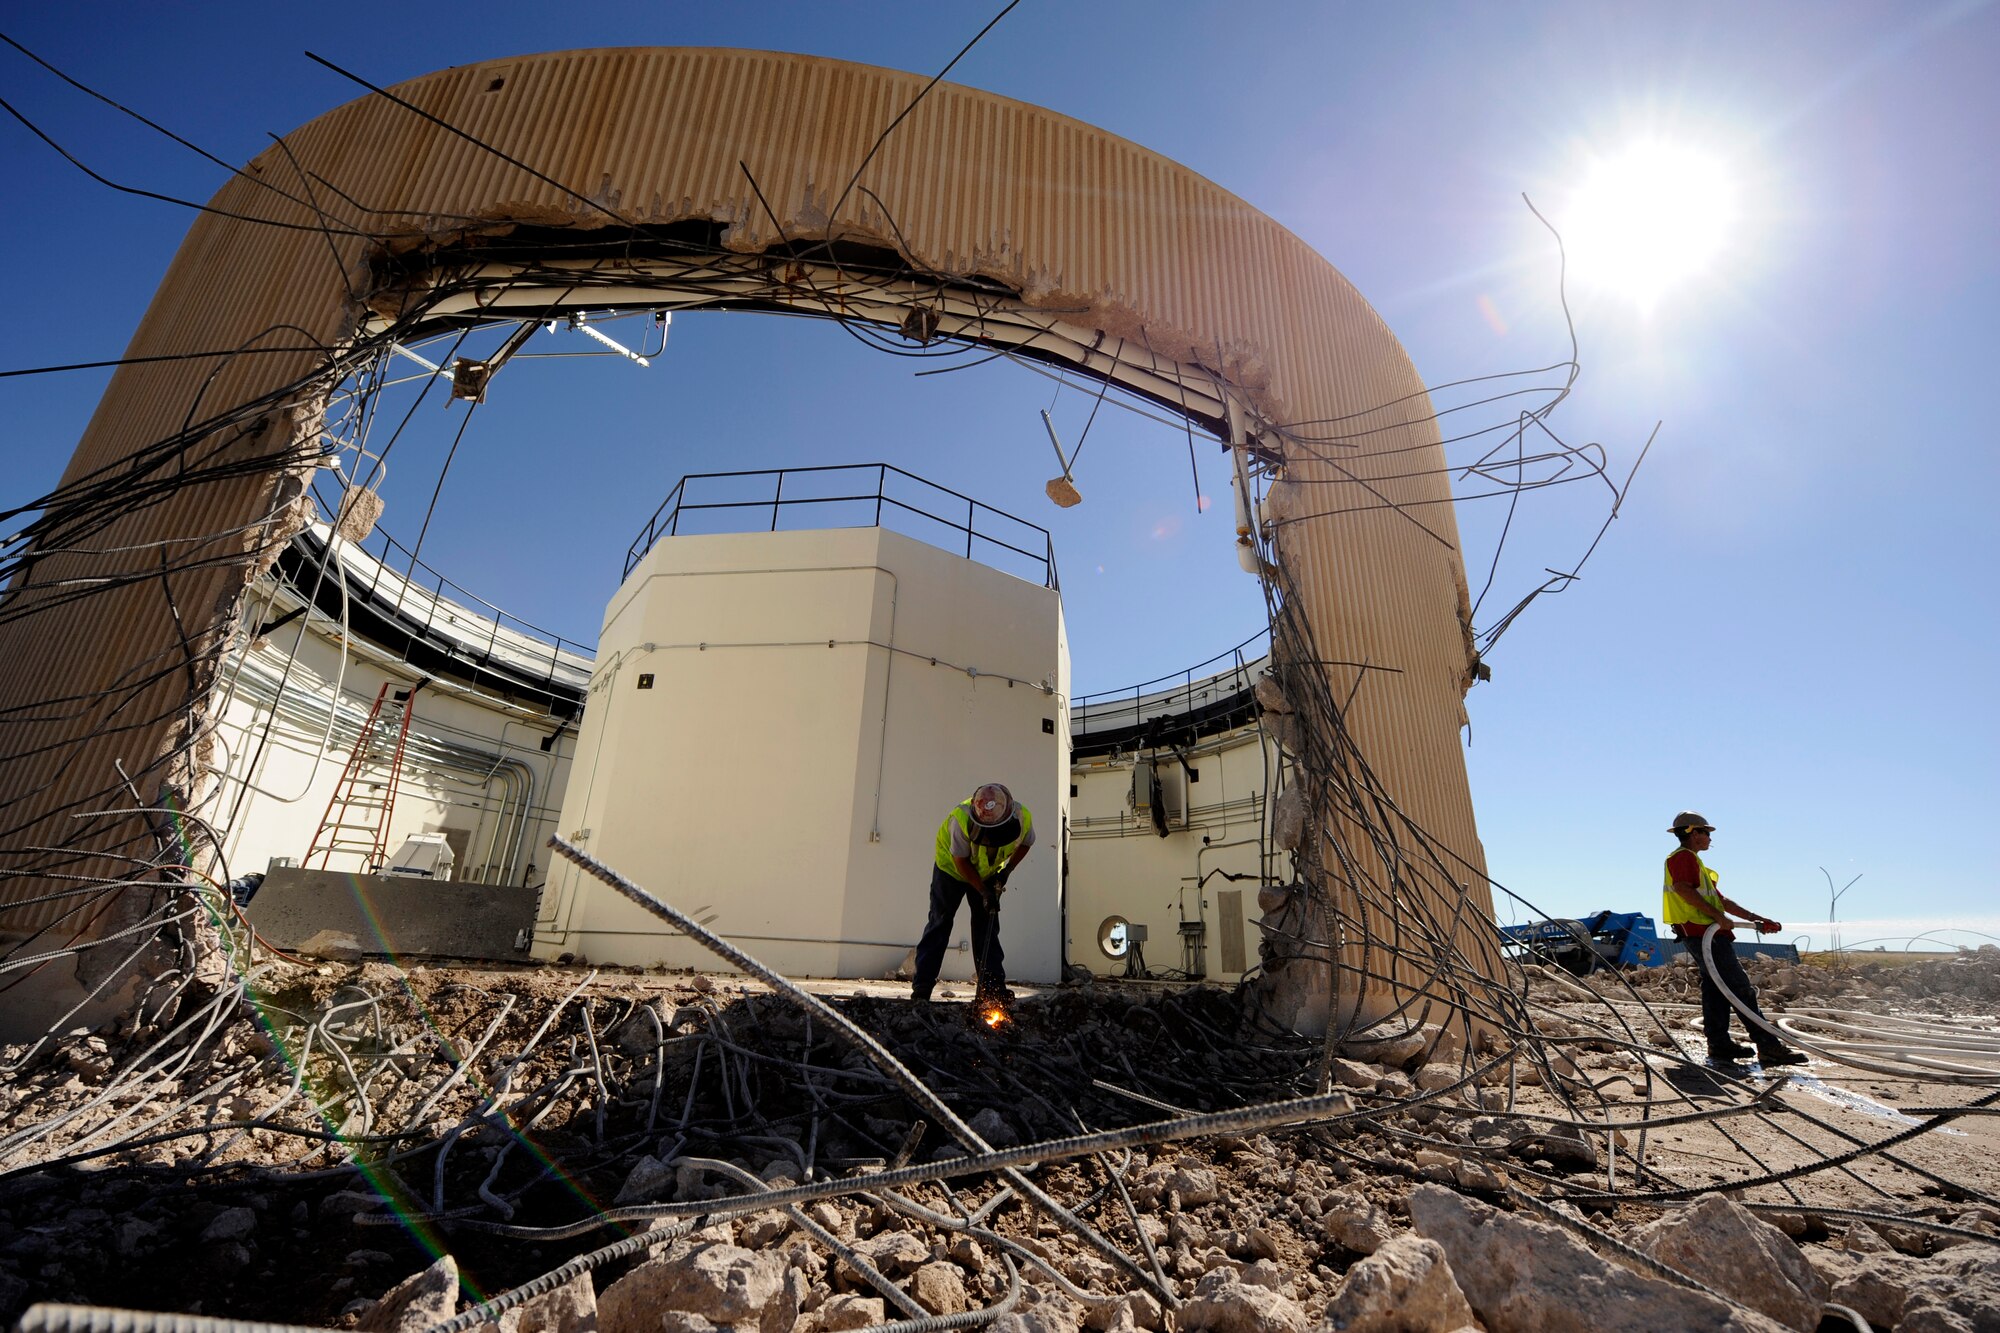 A demolition crew dismantles a Colorado Tracking Station antenna building Sept. 19, 2014, at Schriever Air Force Base, Colo. The 22nd Space Operations Squadron will officially decommission the tracking station, known as PIKE, during a ceremony Sept. 29, 2014. (U.S. Air Force photo/Dennis Rogers)